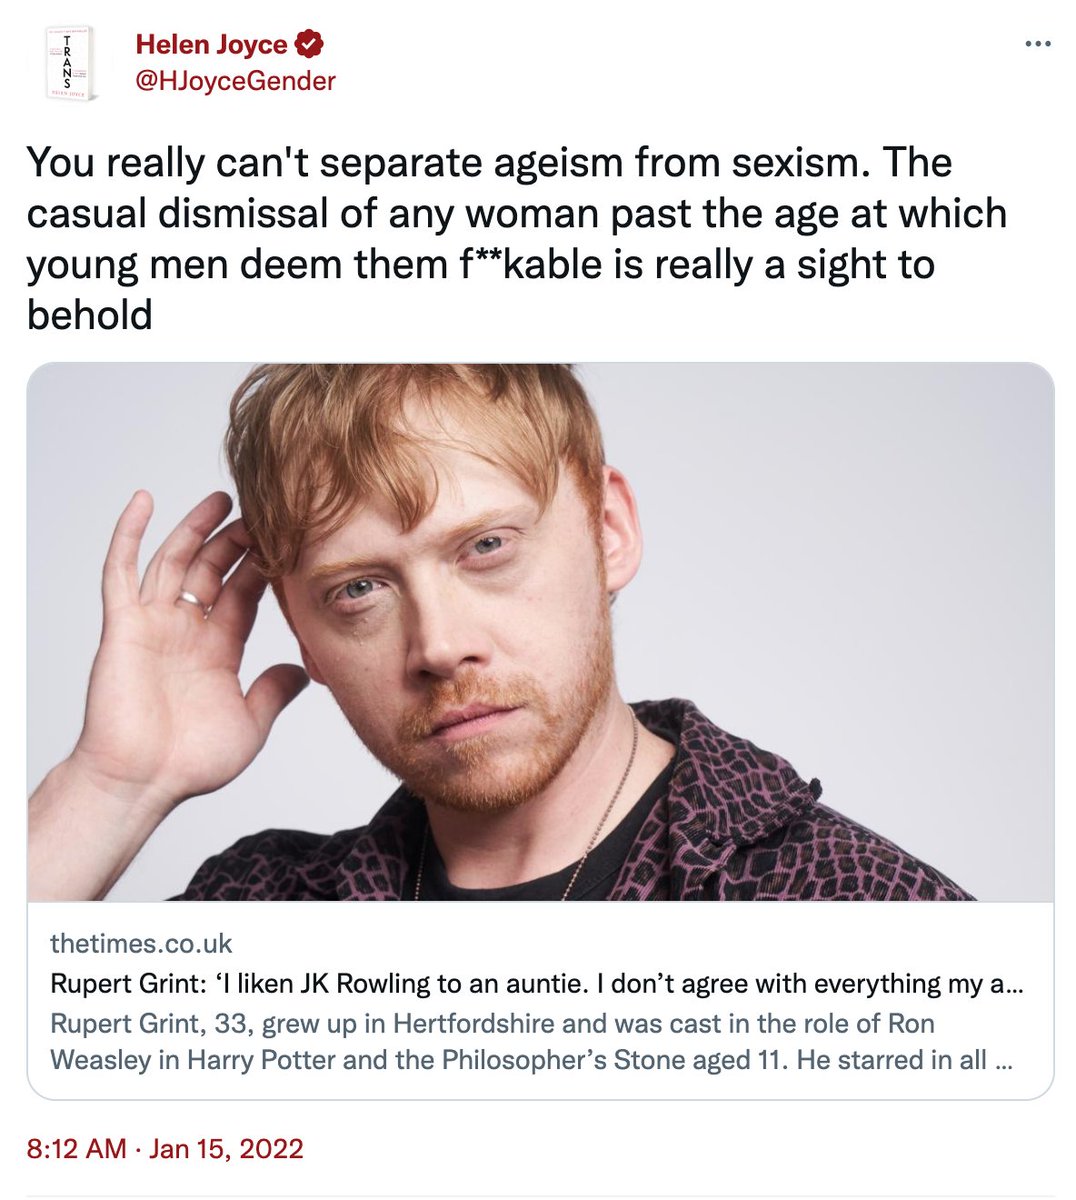 twitter hot takes 2022 - Rupert Grint - You really can't separate ageism from sexism. The casual dismissal of any woman past the age at which young men deem them fkable is really a sight to behold thetimes.co.uk Rupert Grint 'I n Jk Rowling to an auntie. 